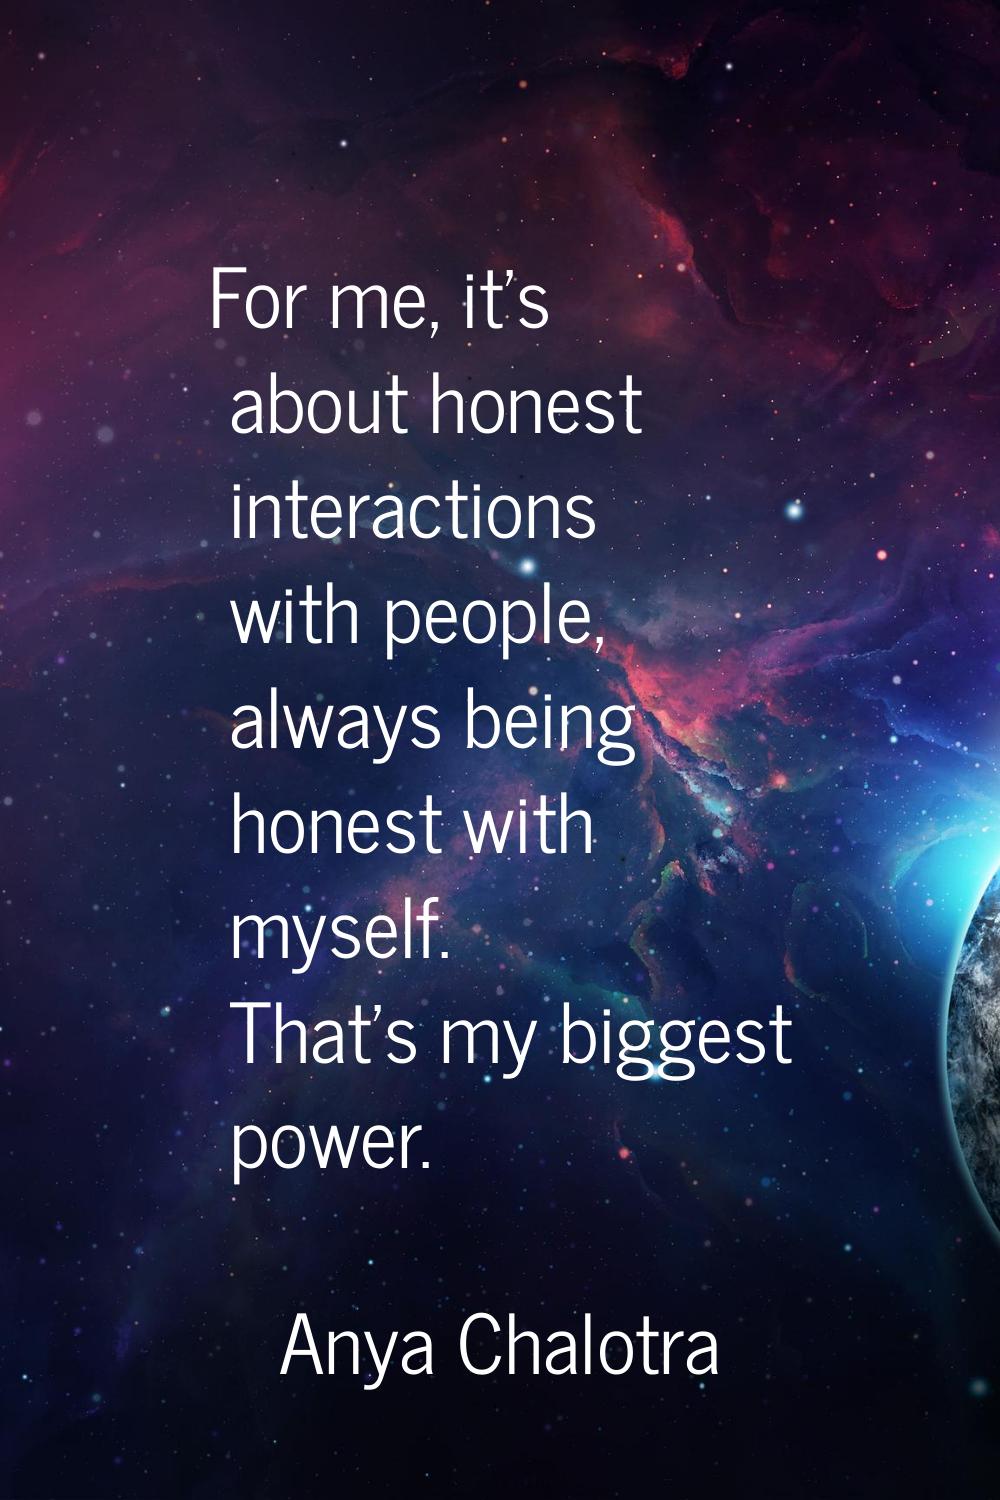 For me, it's about honest interactions with people, always being honest with myself. That's my bigg